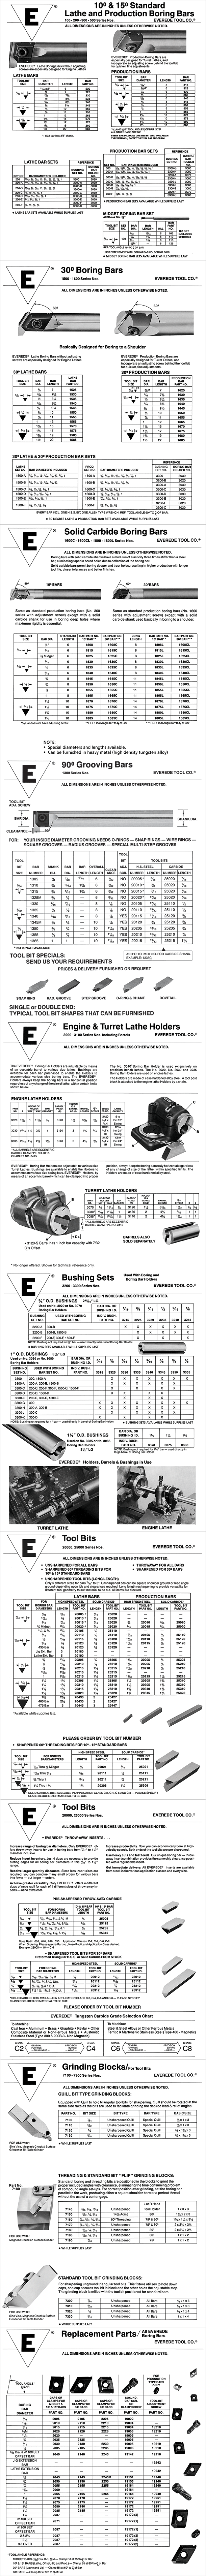 2014 Everede Catalog Production Style Boring Bars, Inserts & Parts List